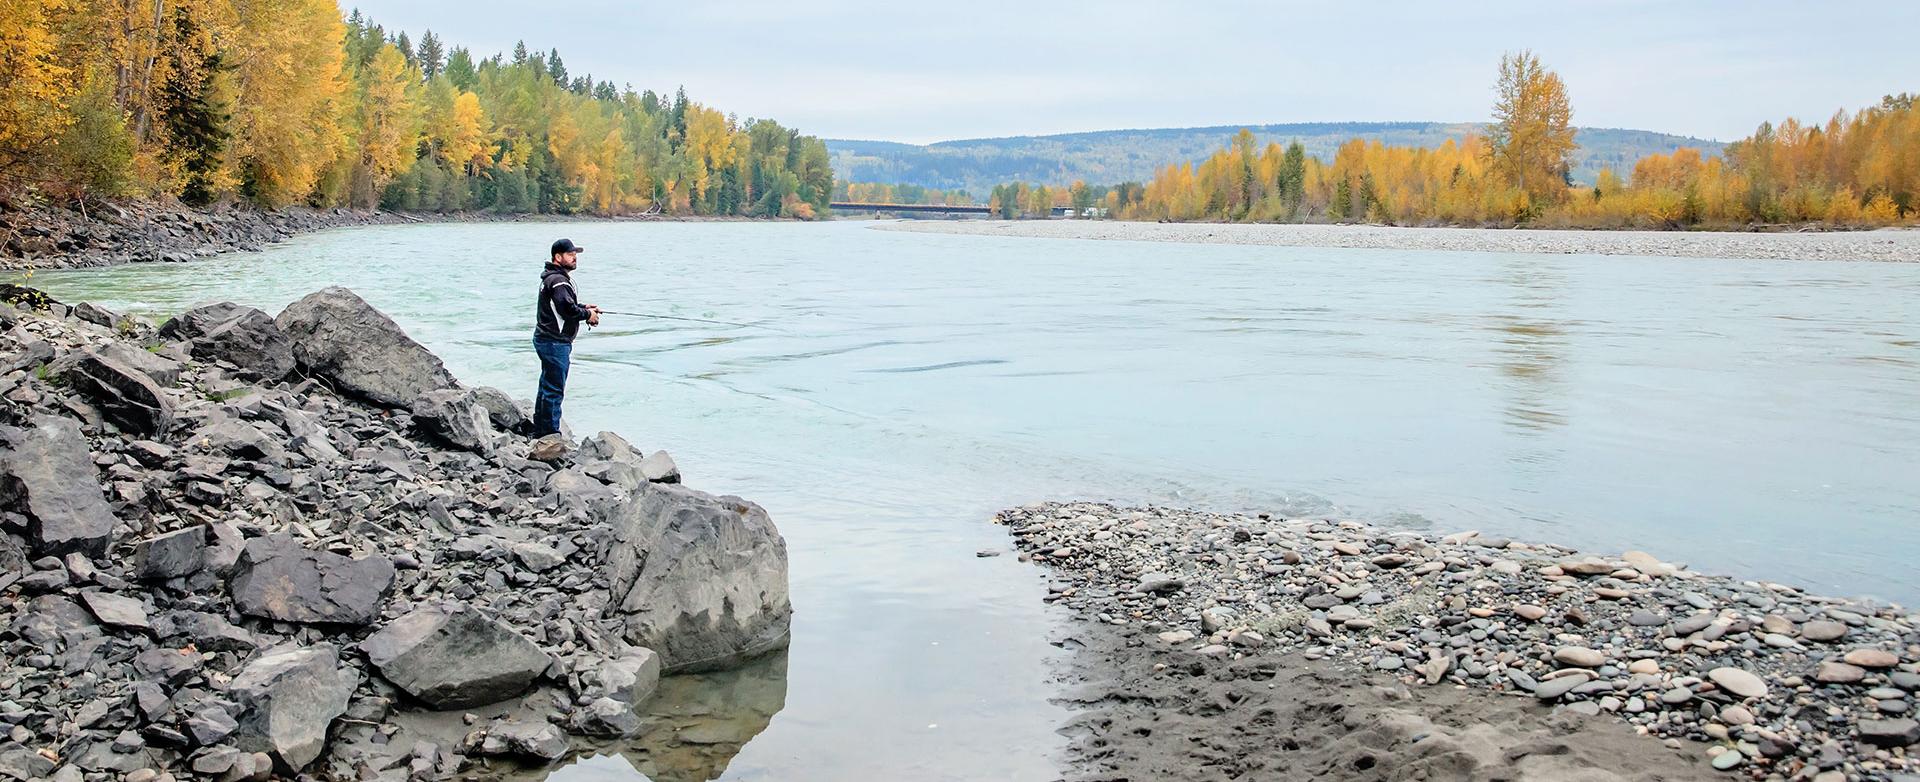 Man fishing on the Quesnel River